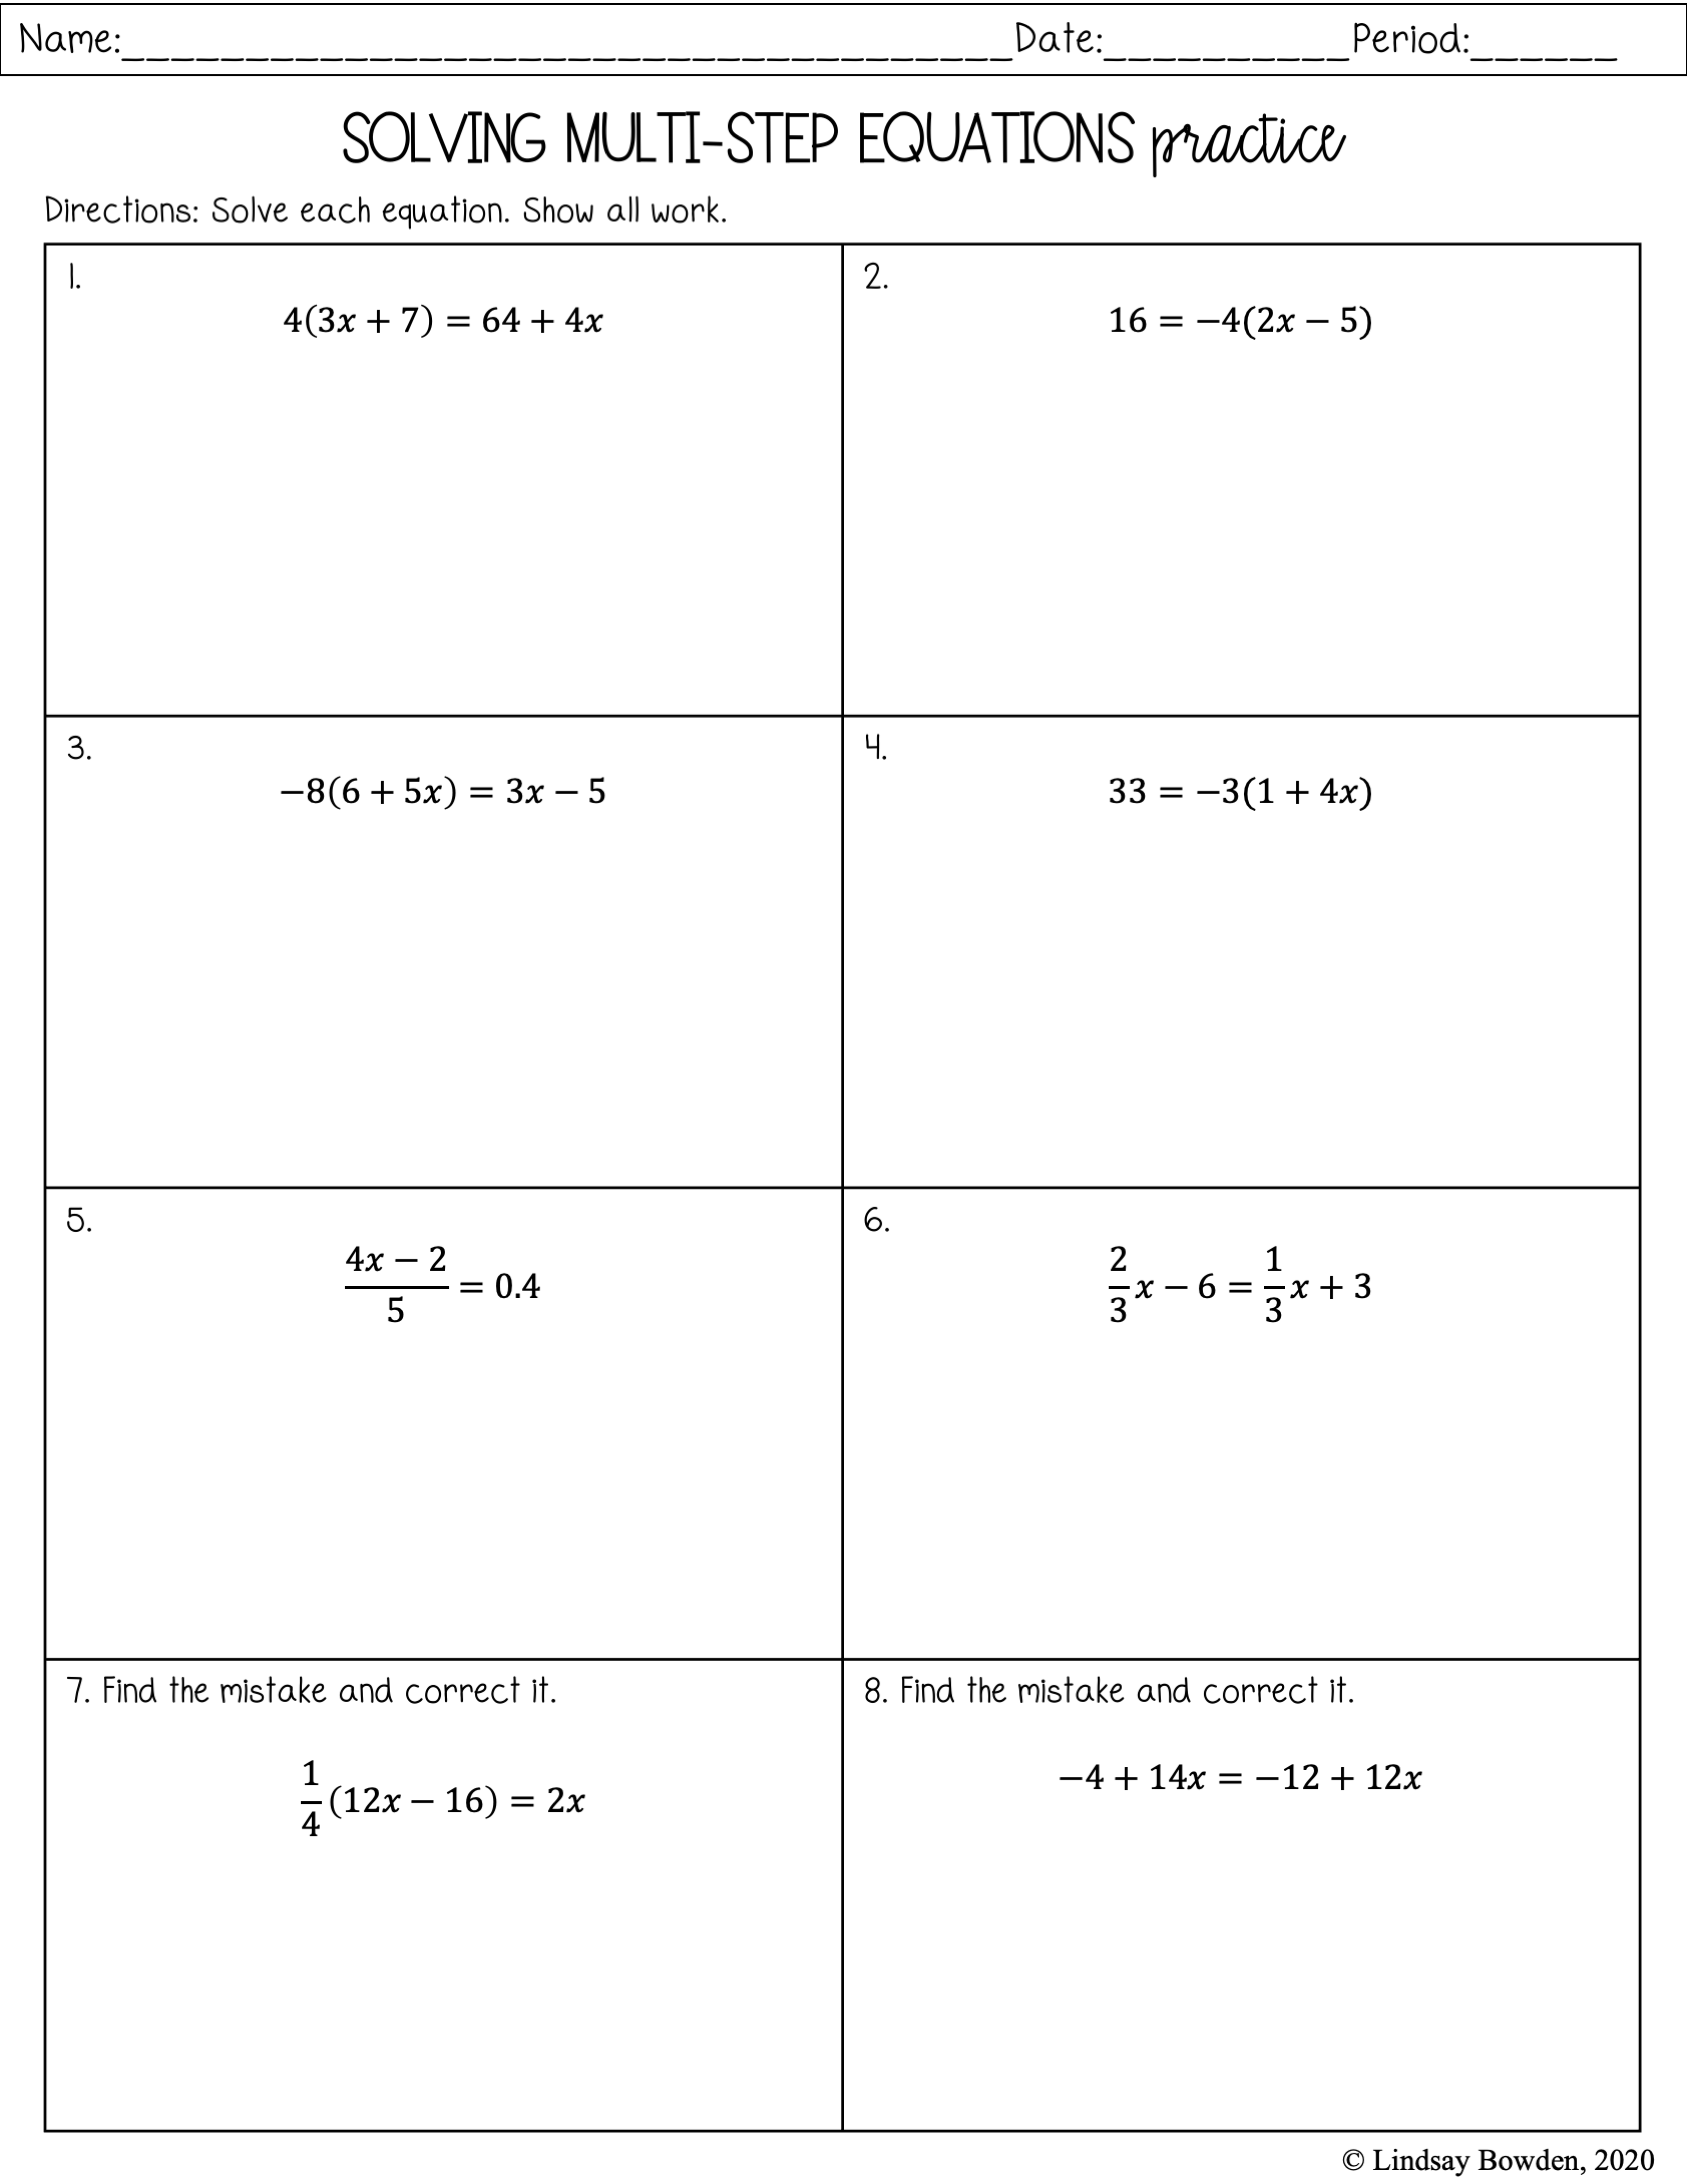 Multi-Step Equation Notes and Worksheets - Lindsay Bowden For Combining Like Terms Equations Worksheet